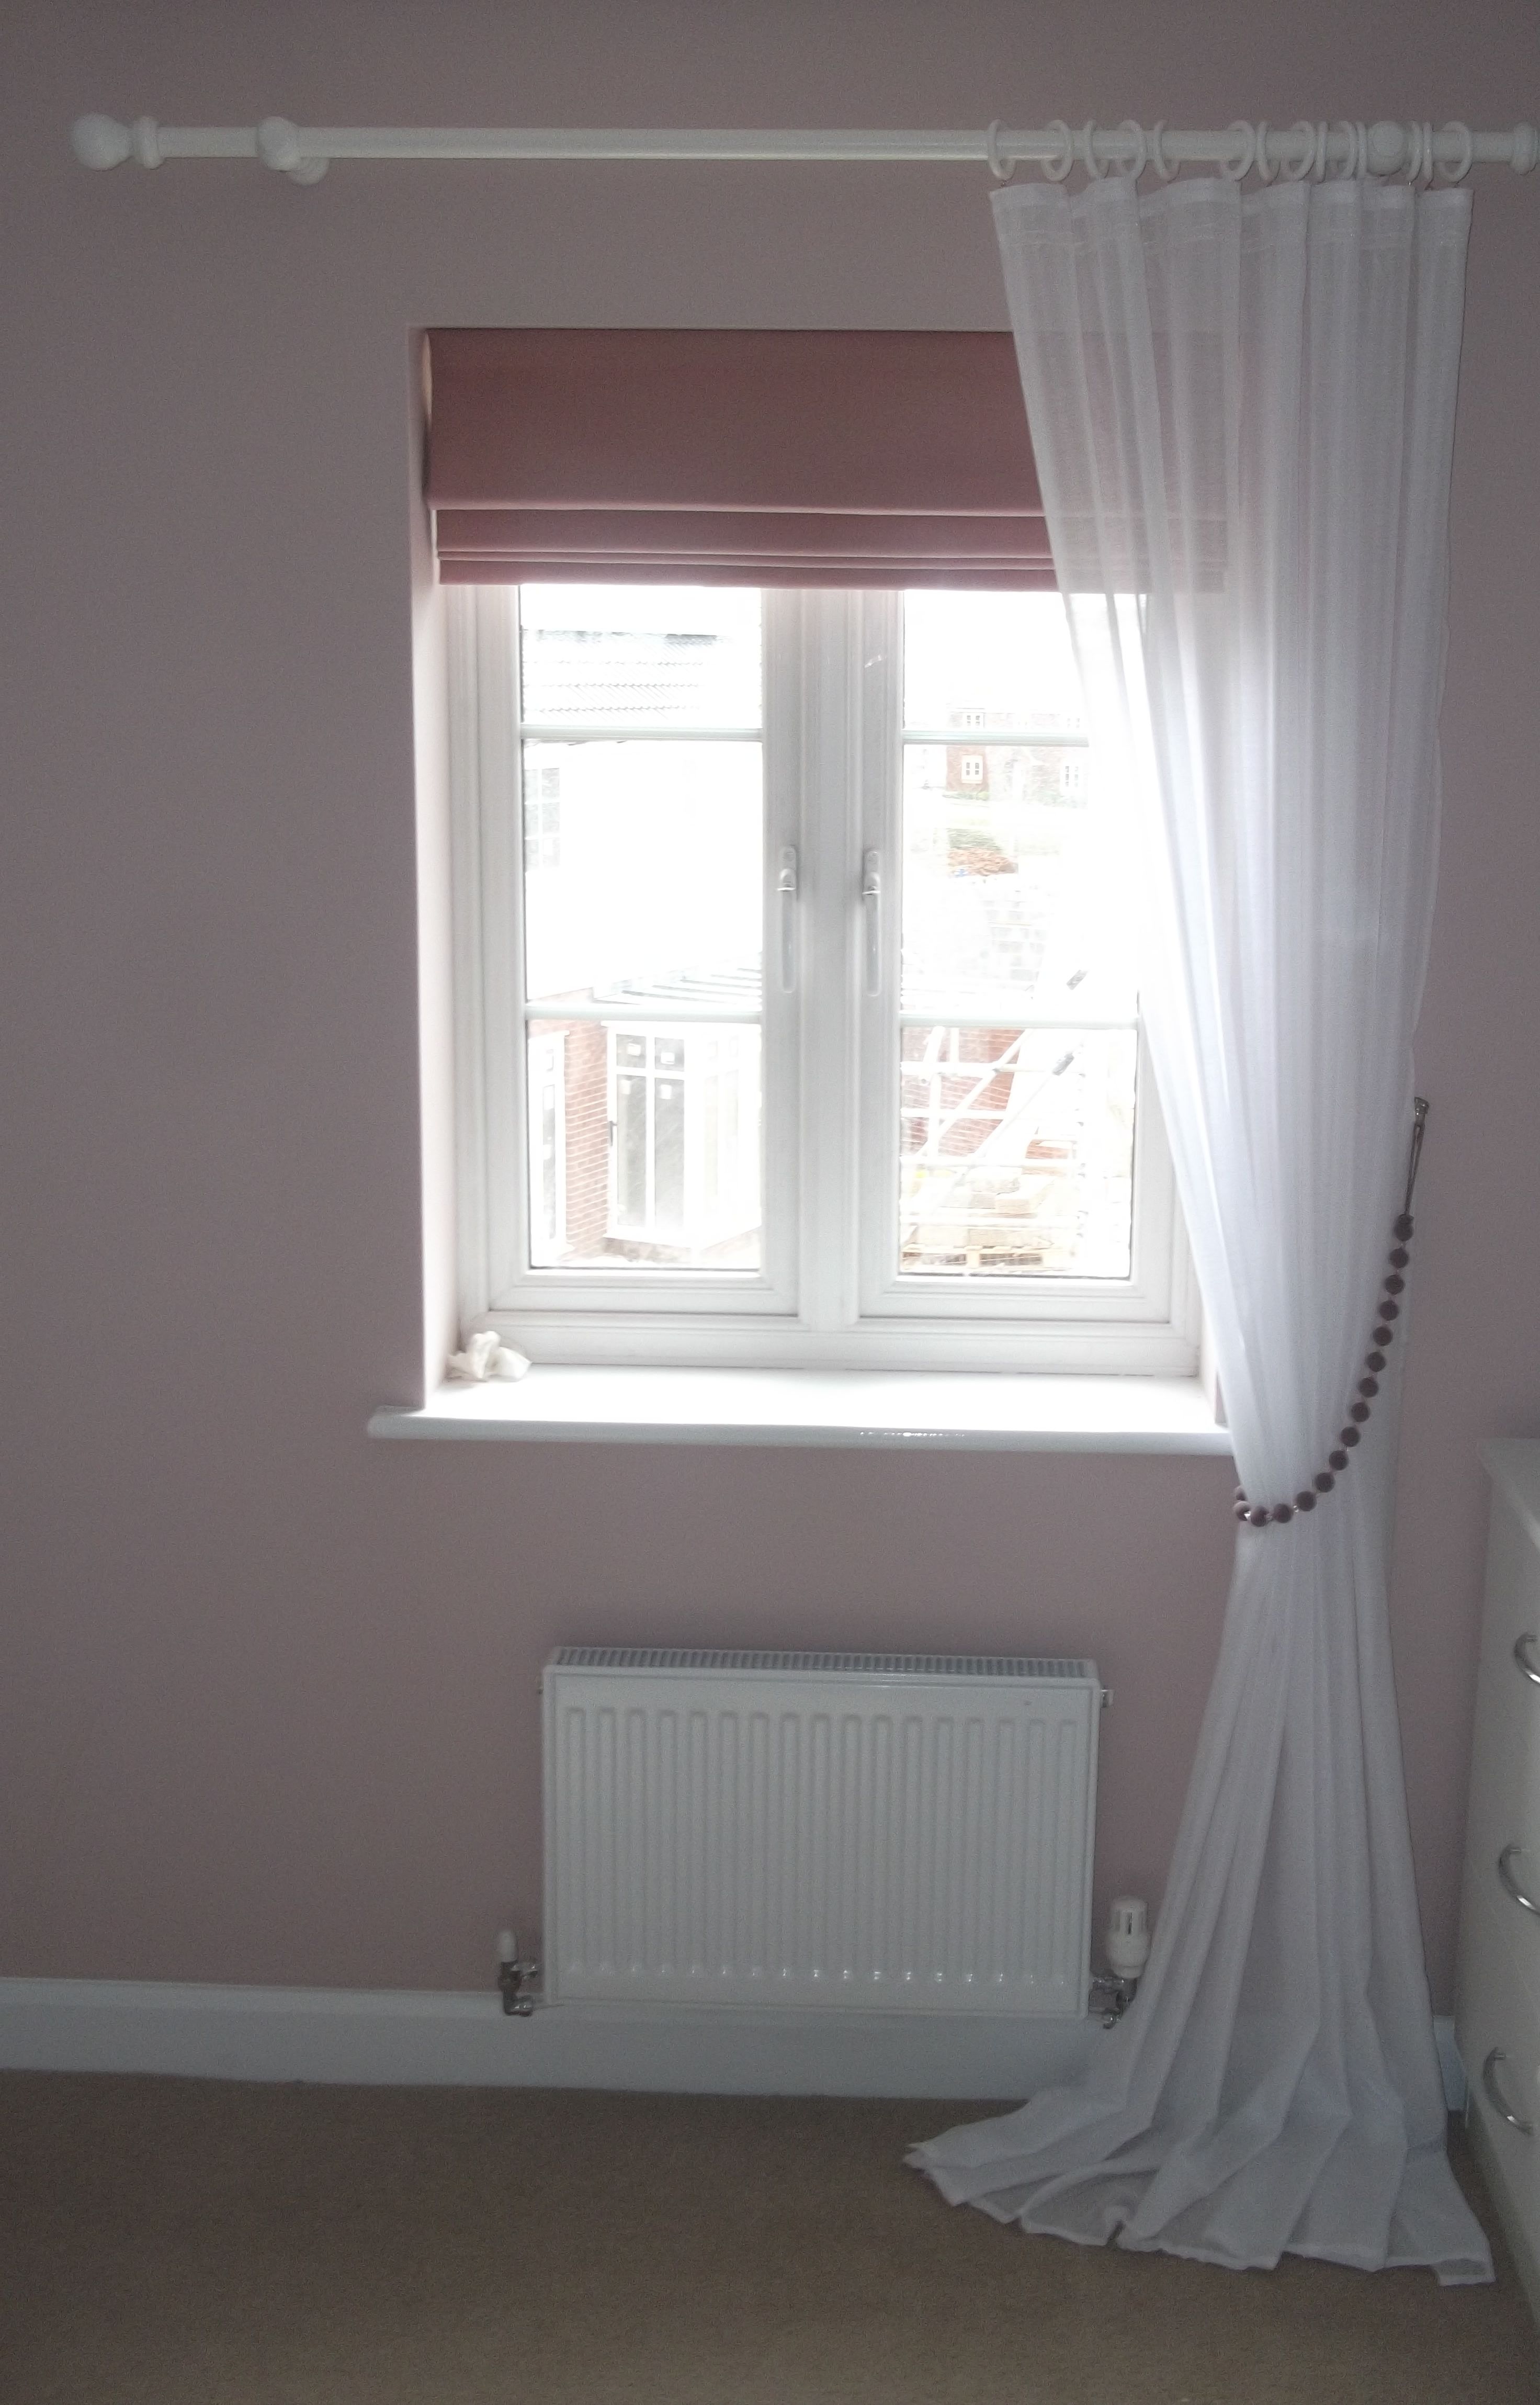 Roman Blind With Voile Curtain Windows Pinterest Sheer With Regard To Voile Roman Blinds (View 11 of 15)